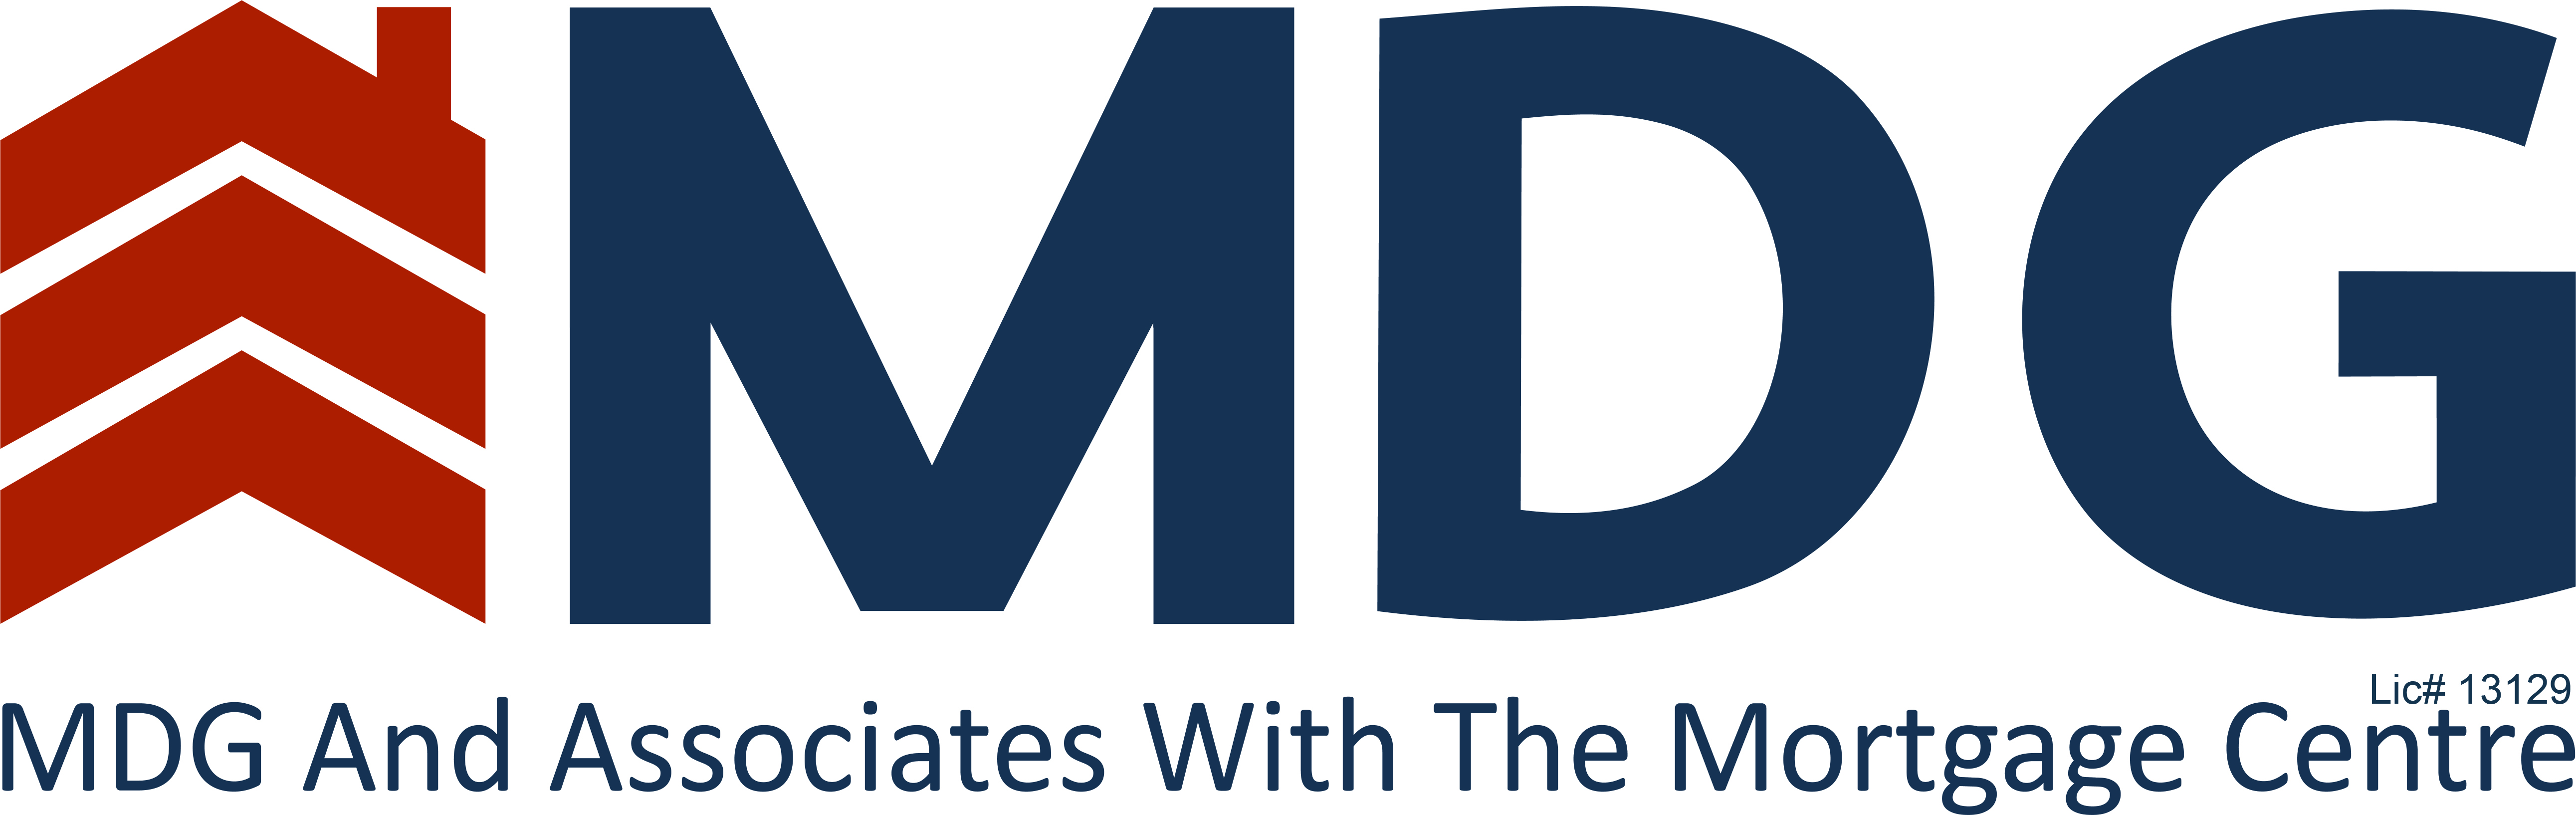 MDG & Associates with The Mortgage Centre